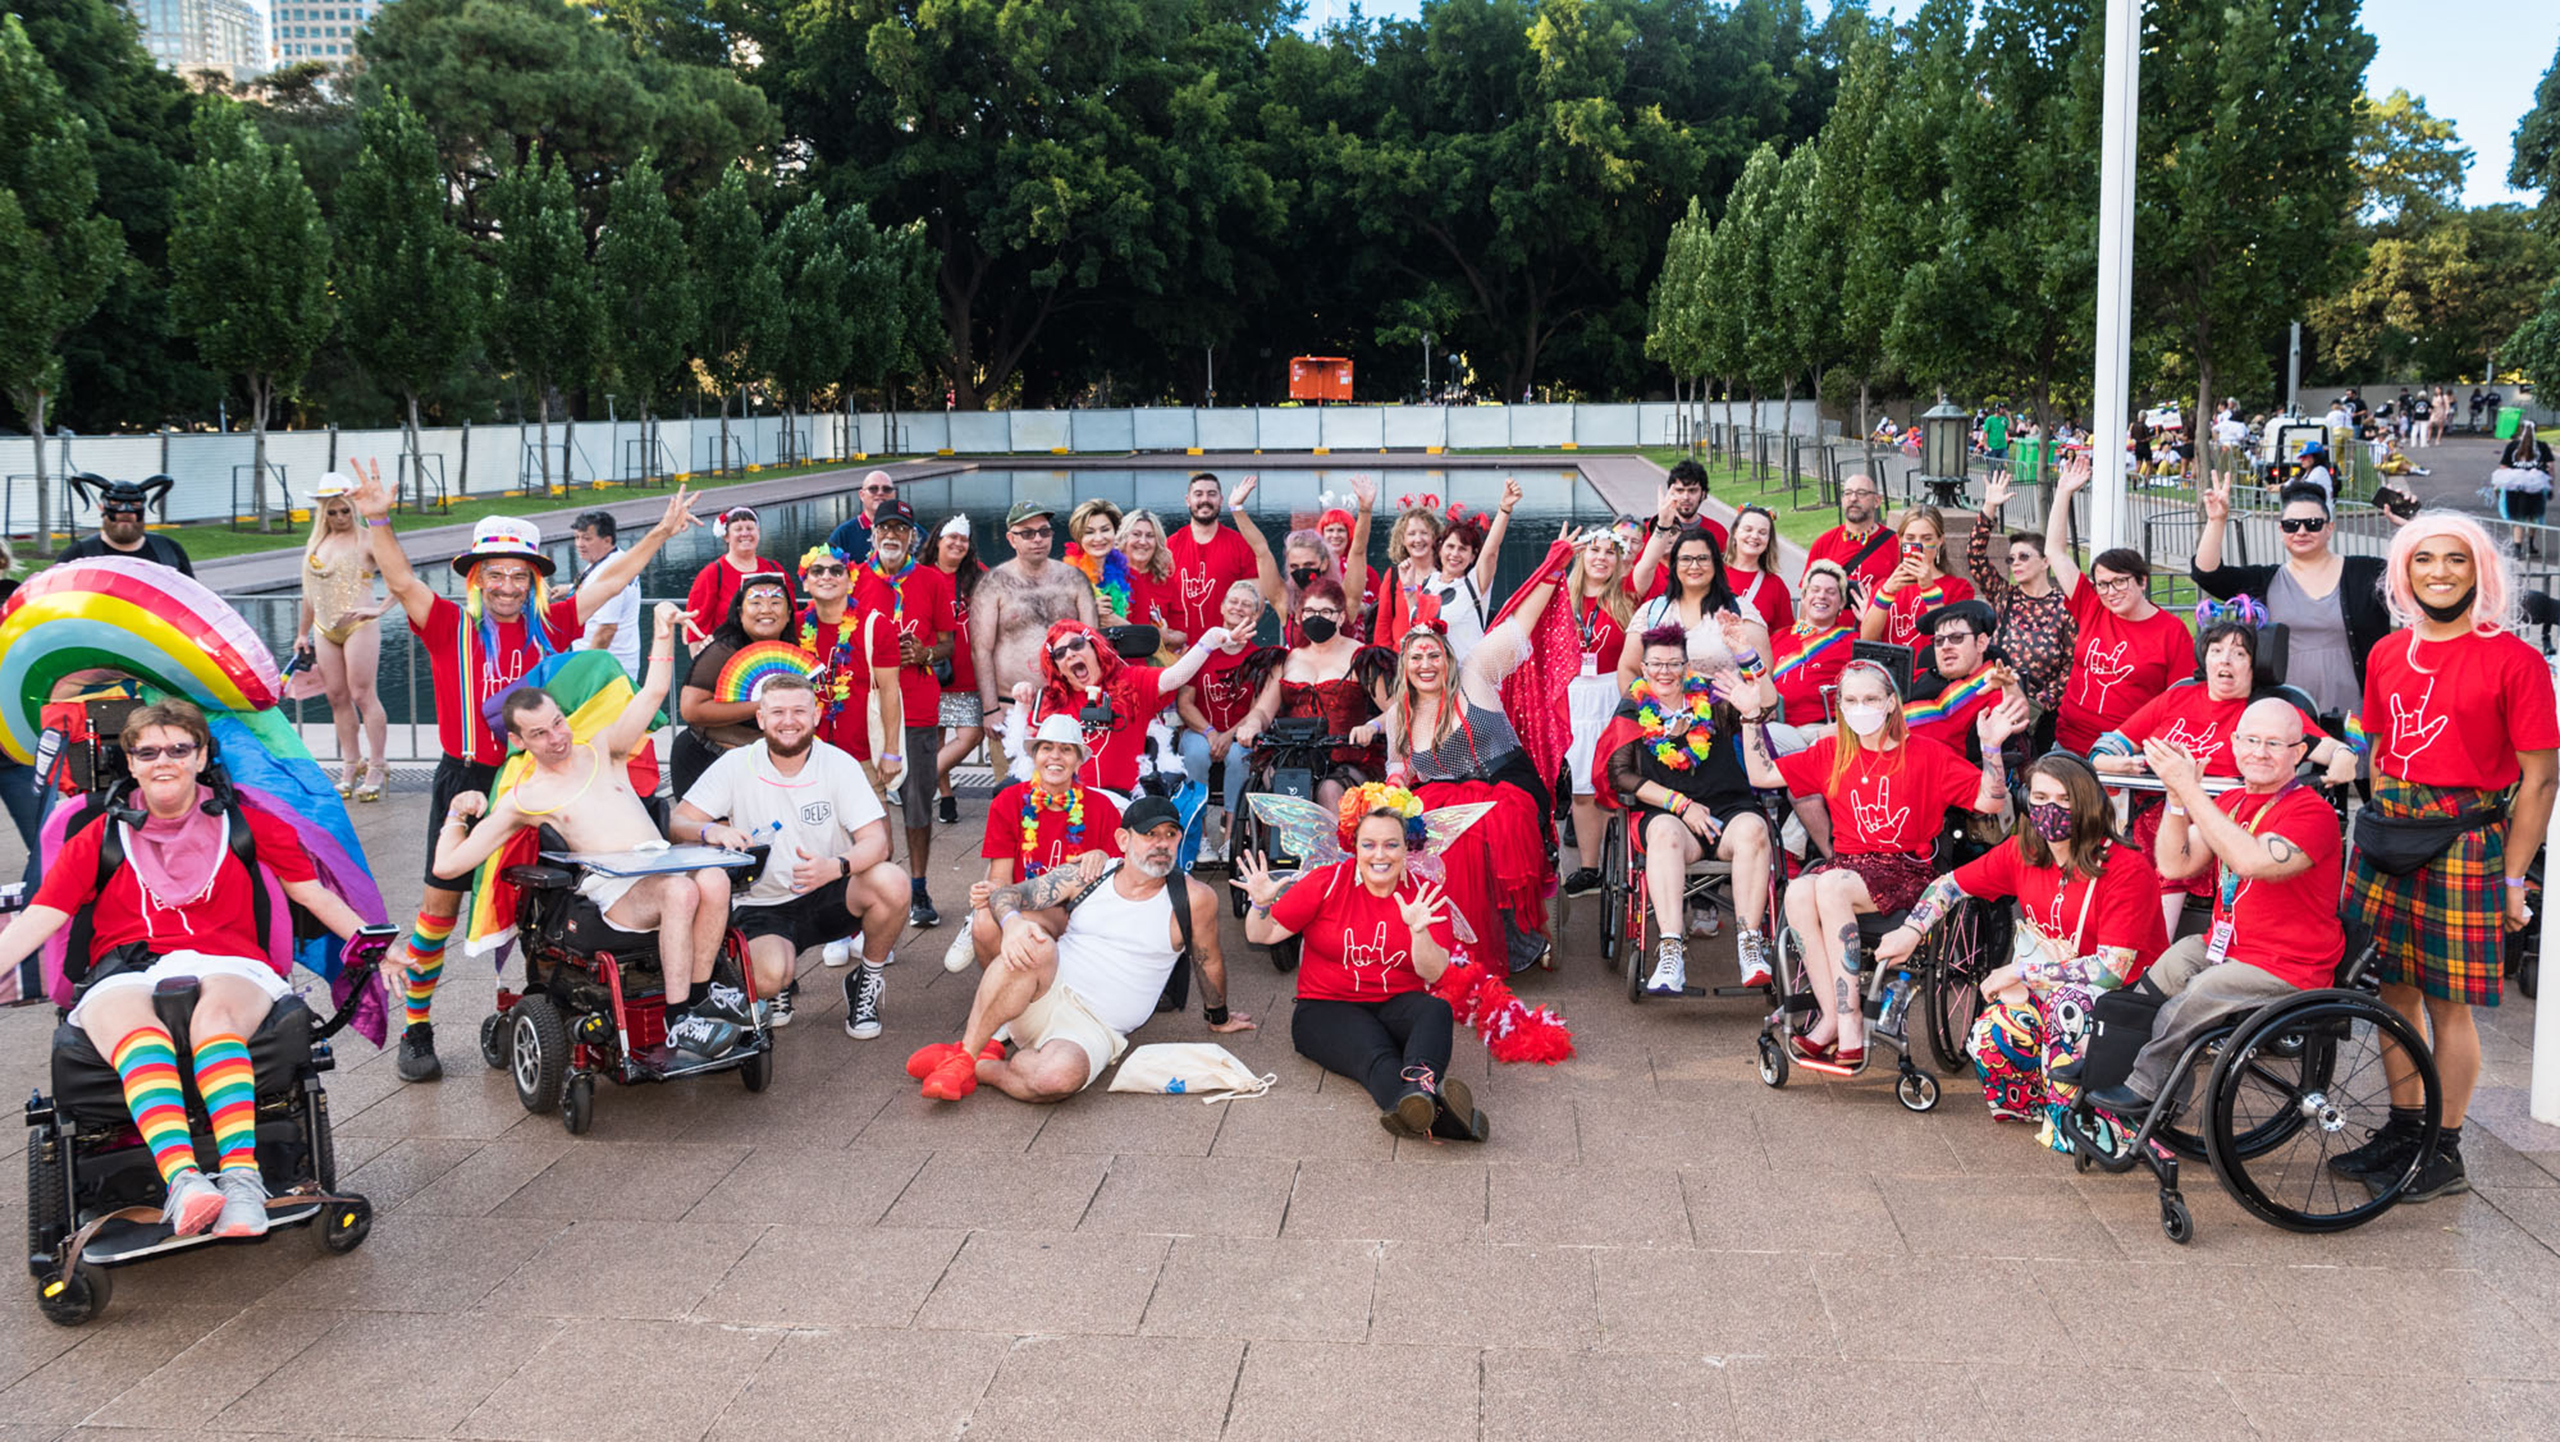 A group photo of people weariing red shirts and rainbow accessories.